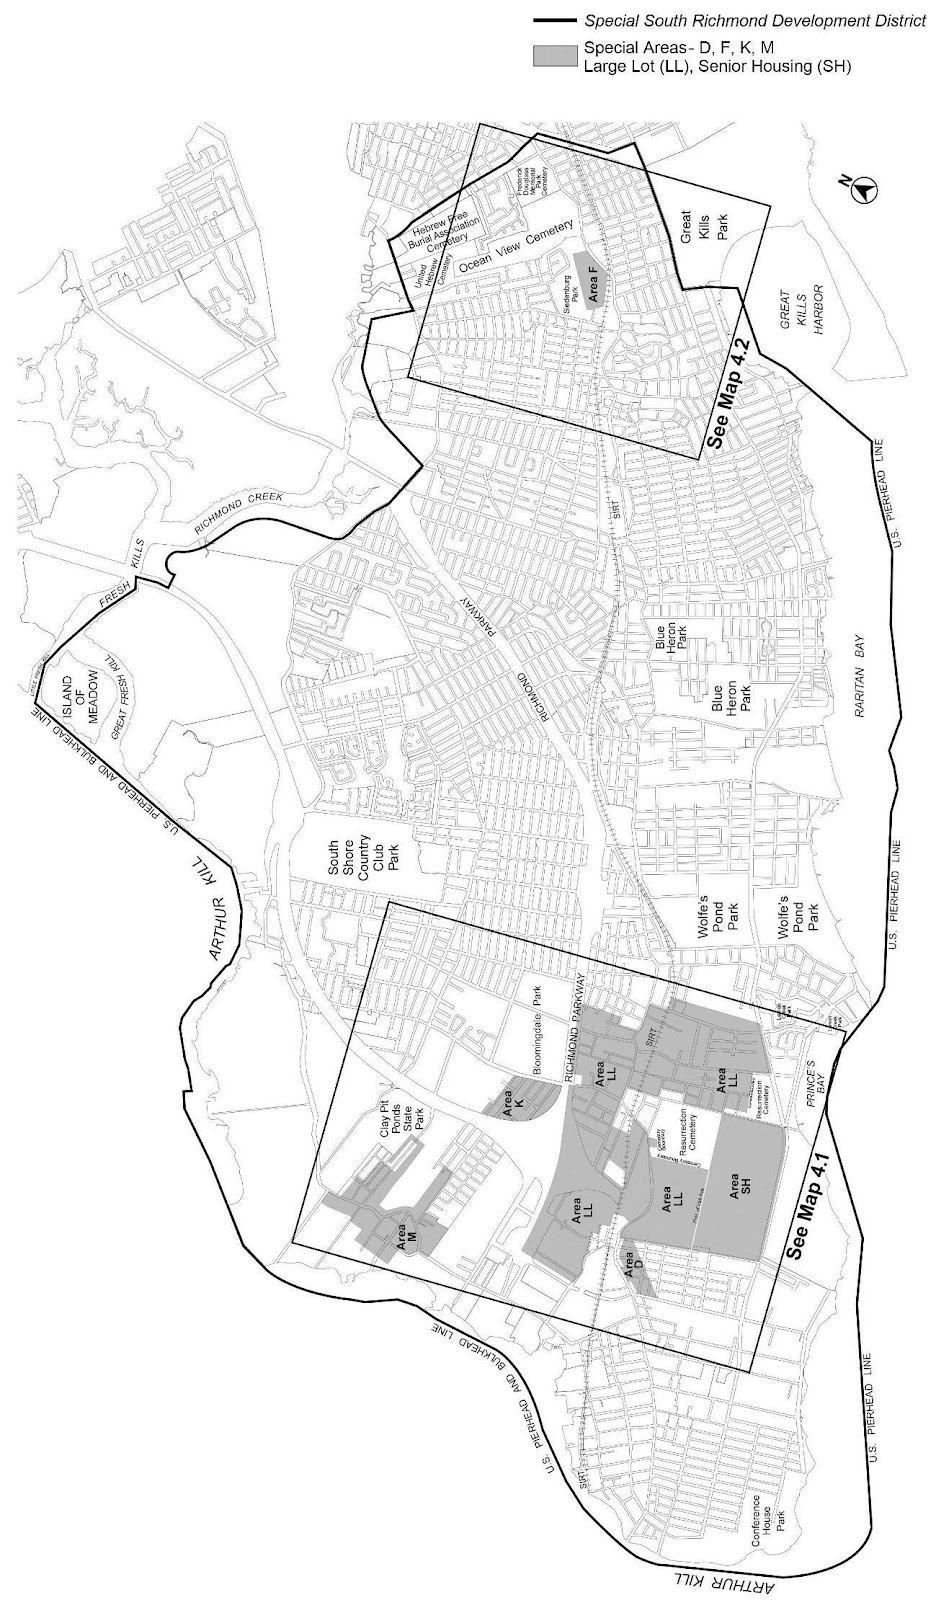 Zoning Resolutions Chapter 7: Special South Richmond Development District Appendix A.13